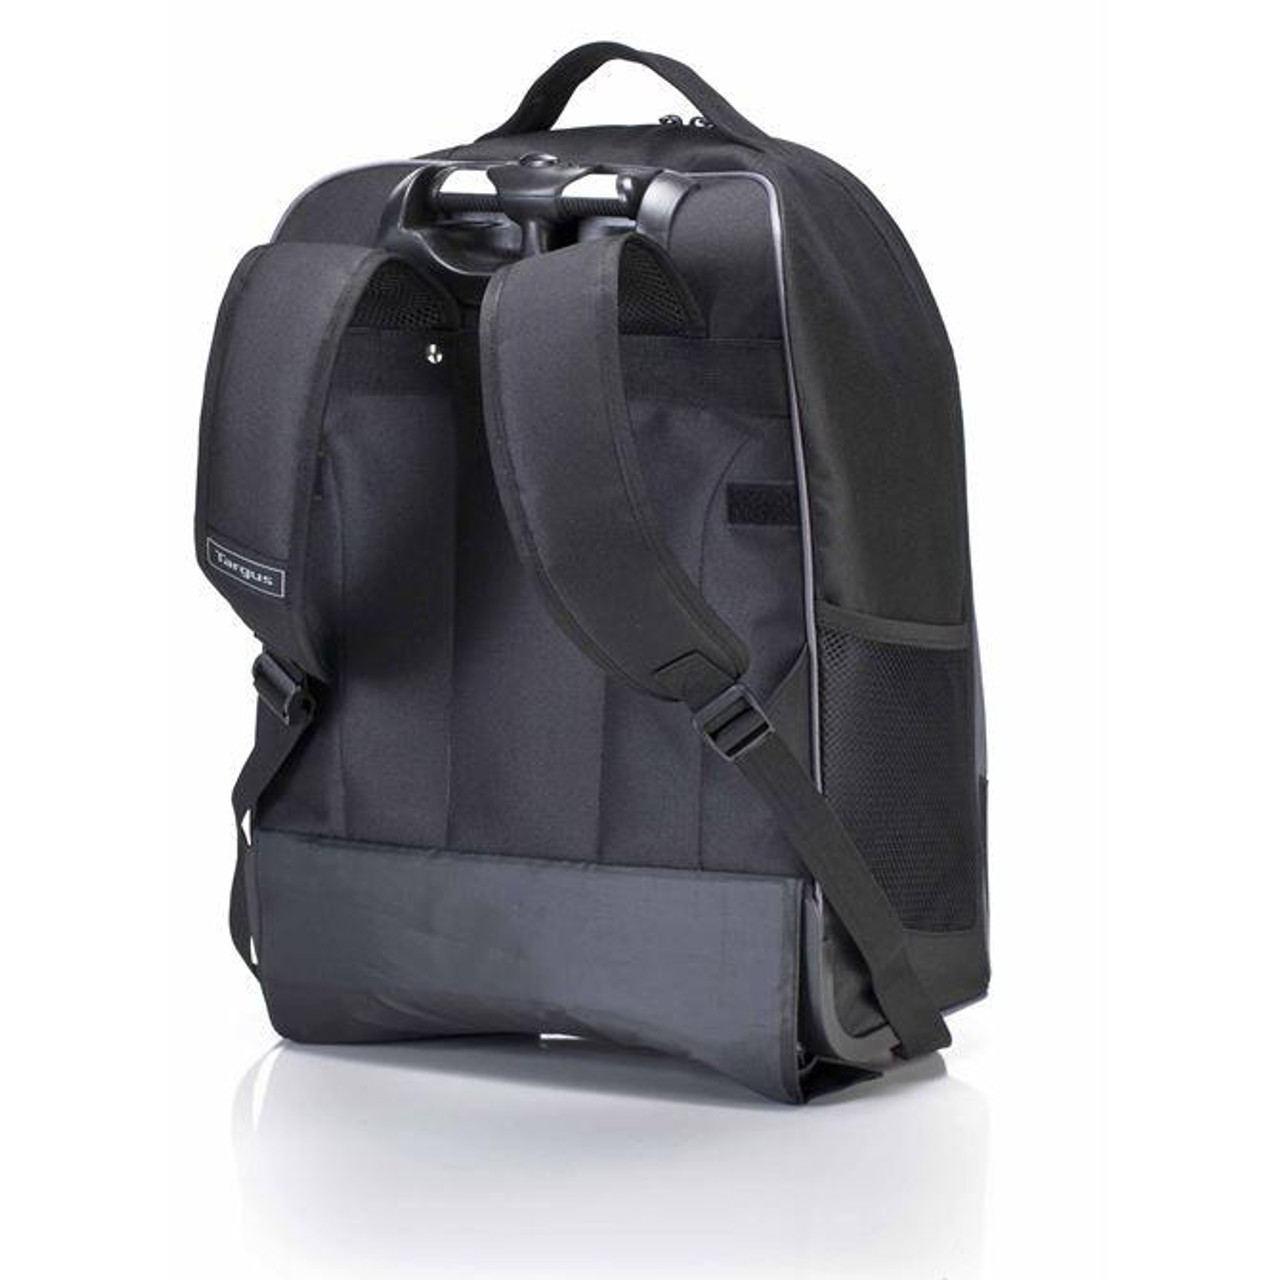 https://cdn11.bigcommerce.com/s-k0ph0vmhvw/images/stencil/1280x1280/products/1330/2363/0002543_16-compact-rolling-backpack_670-711986_1024x1024__88407.1658682197.jpg?c=1?imbypass=on